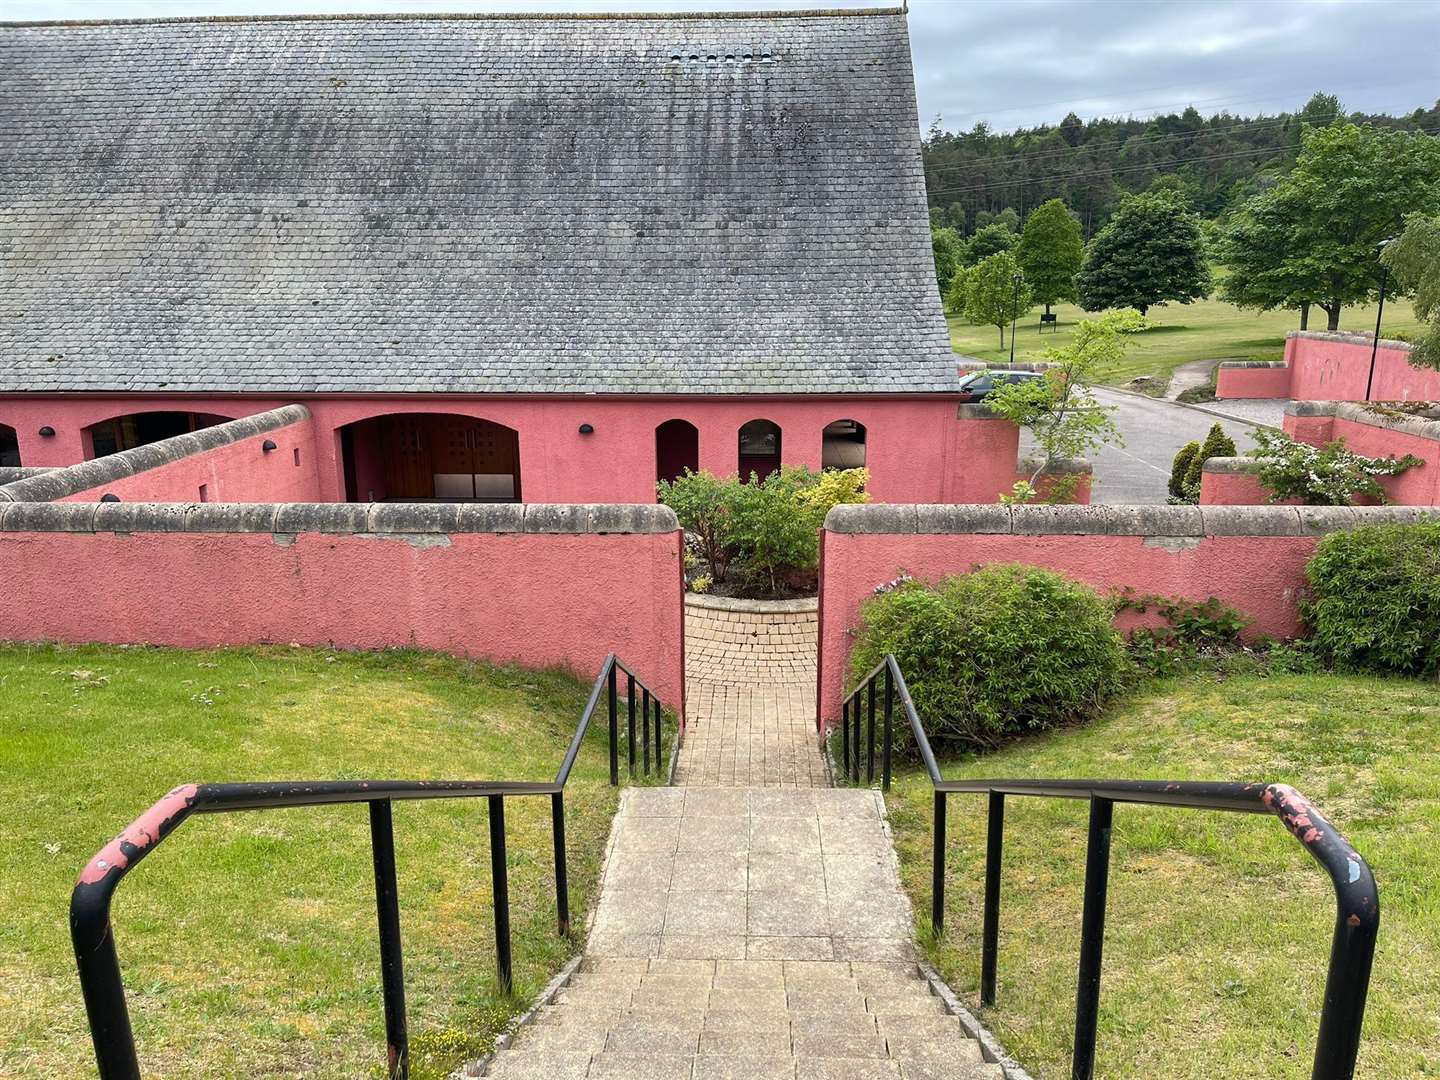 Kilvean Cemetery's crematorium building and grounds were criticised by Cllr Duncan Macpherson.